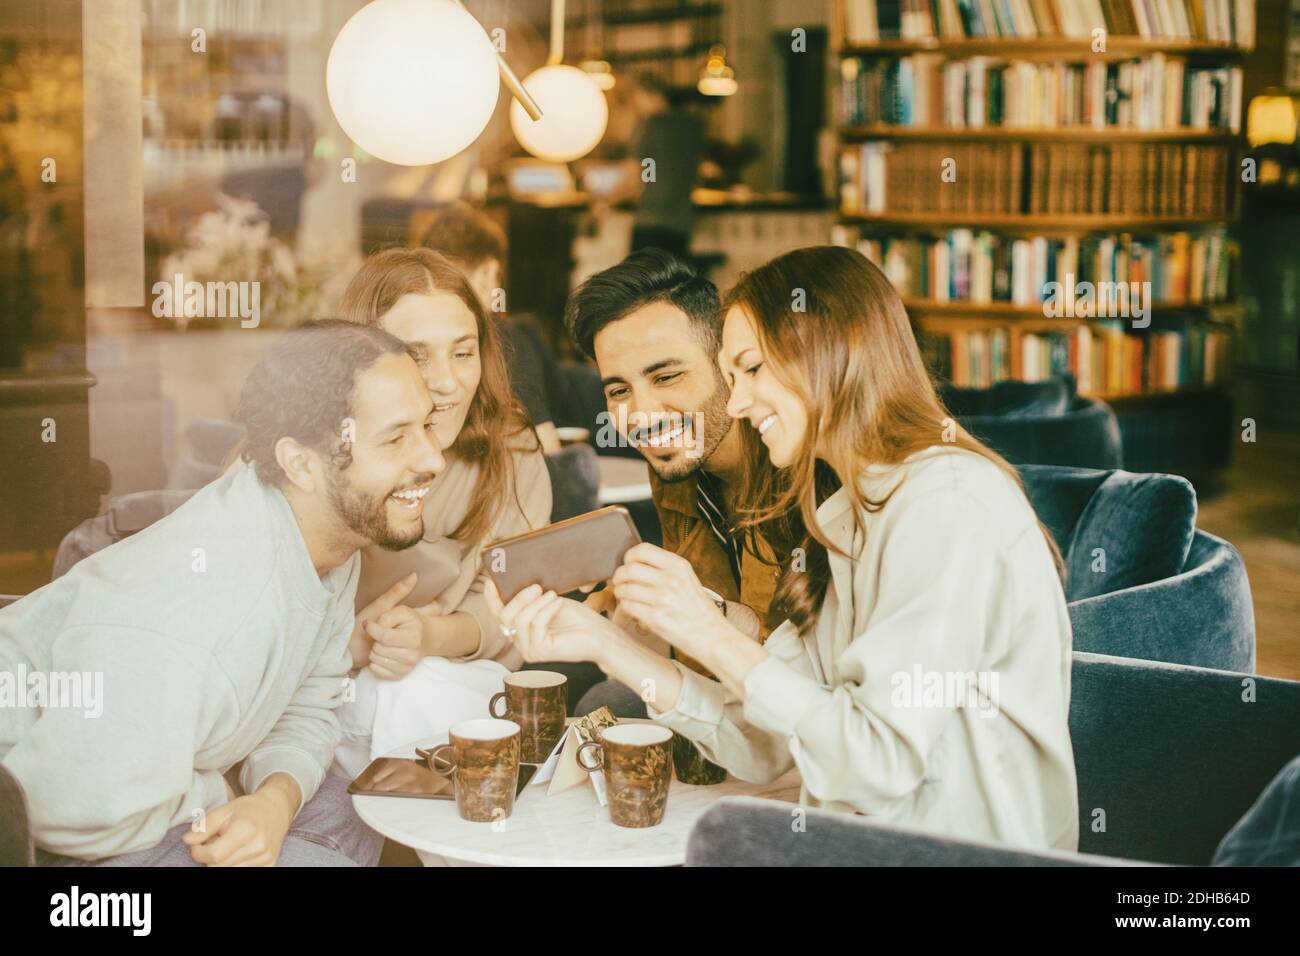 Happy woman showing smart phone to friends while sitting in restaurant seen through glass Stock Photo